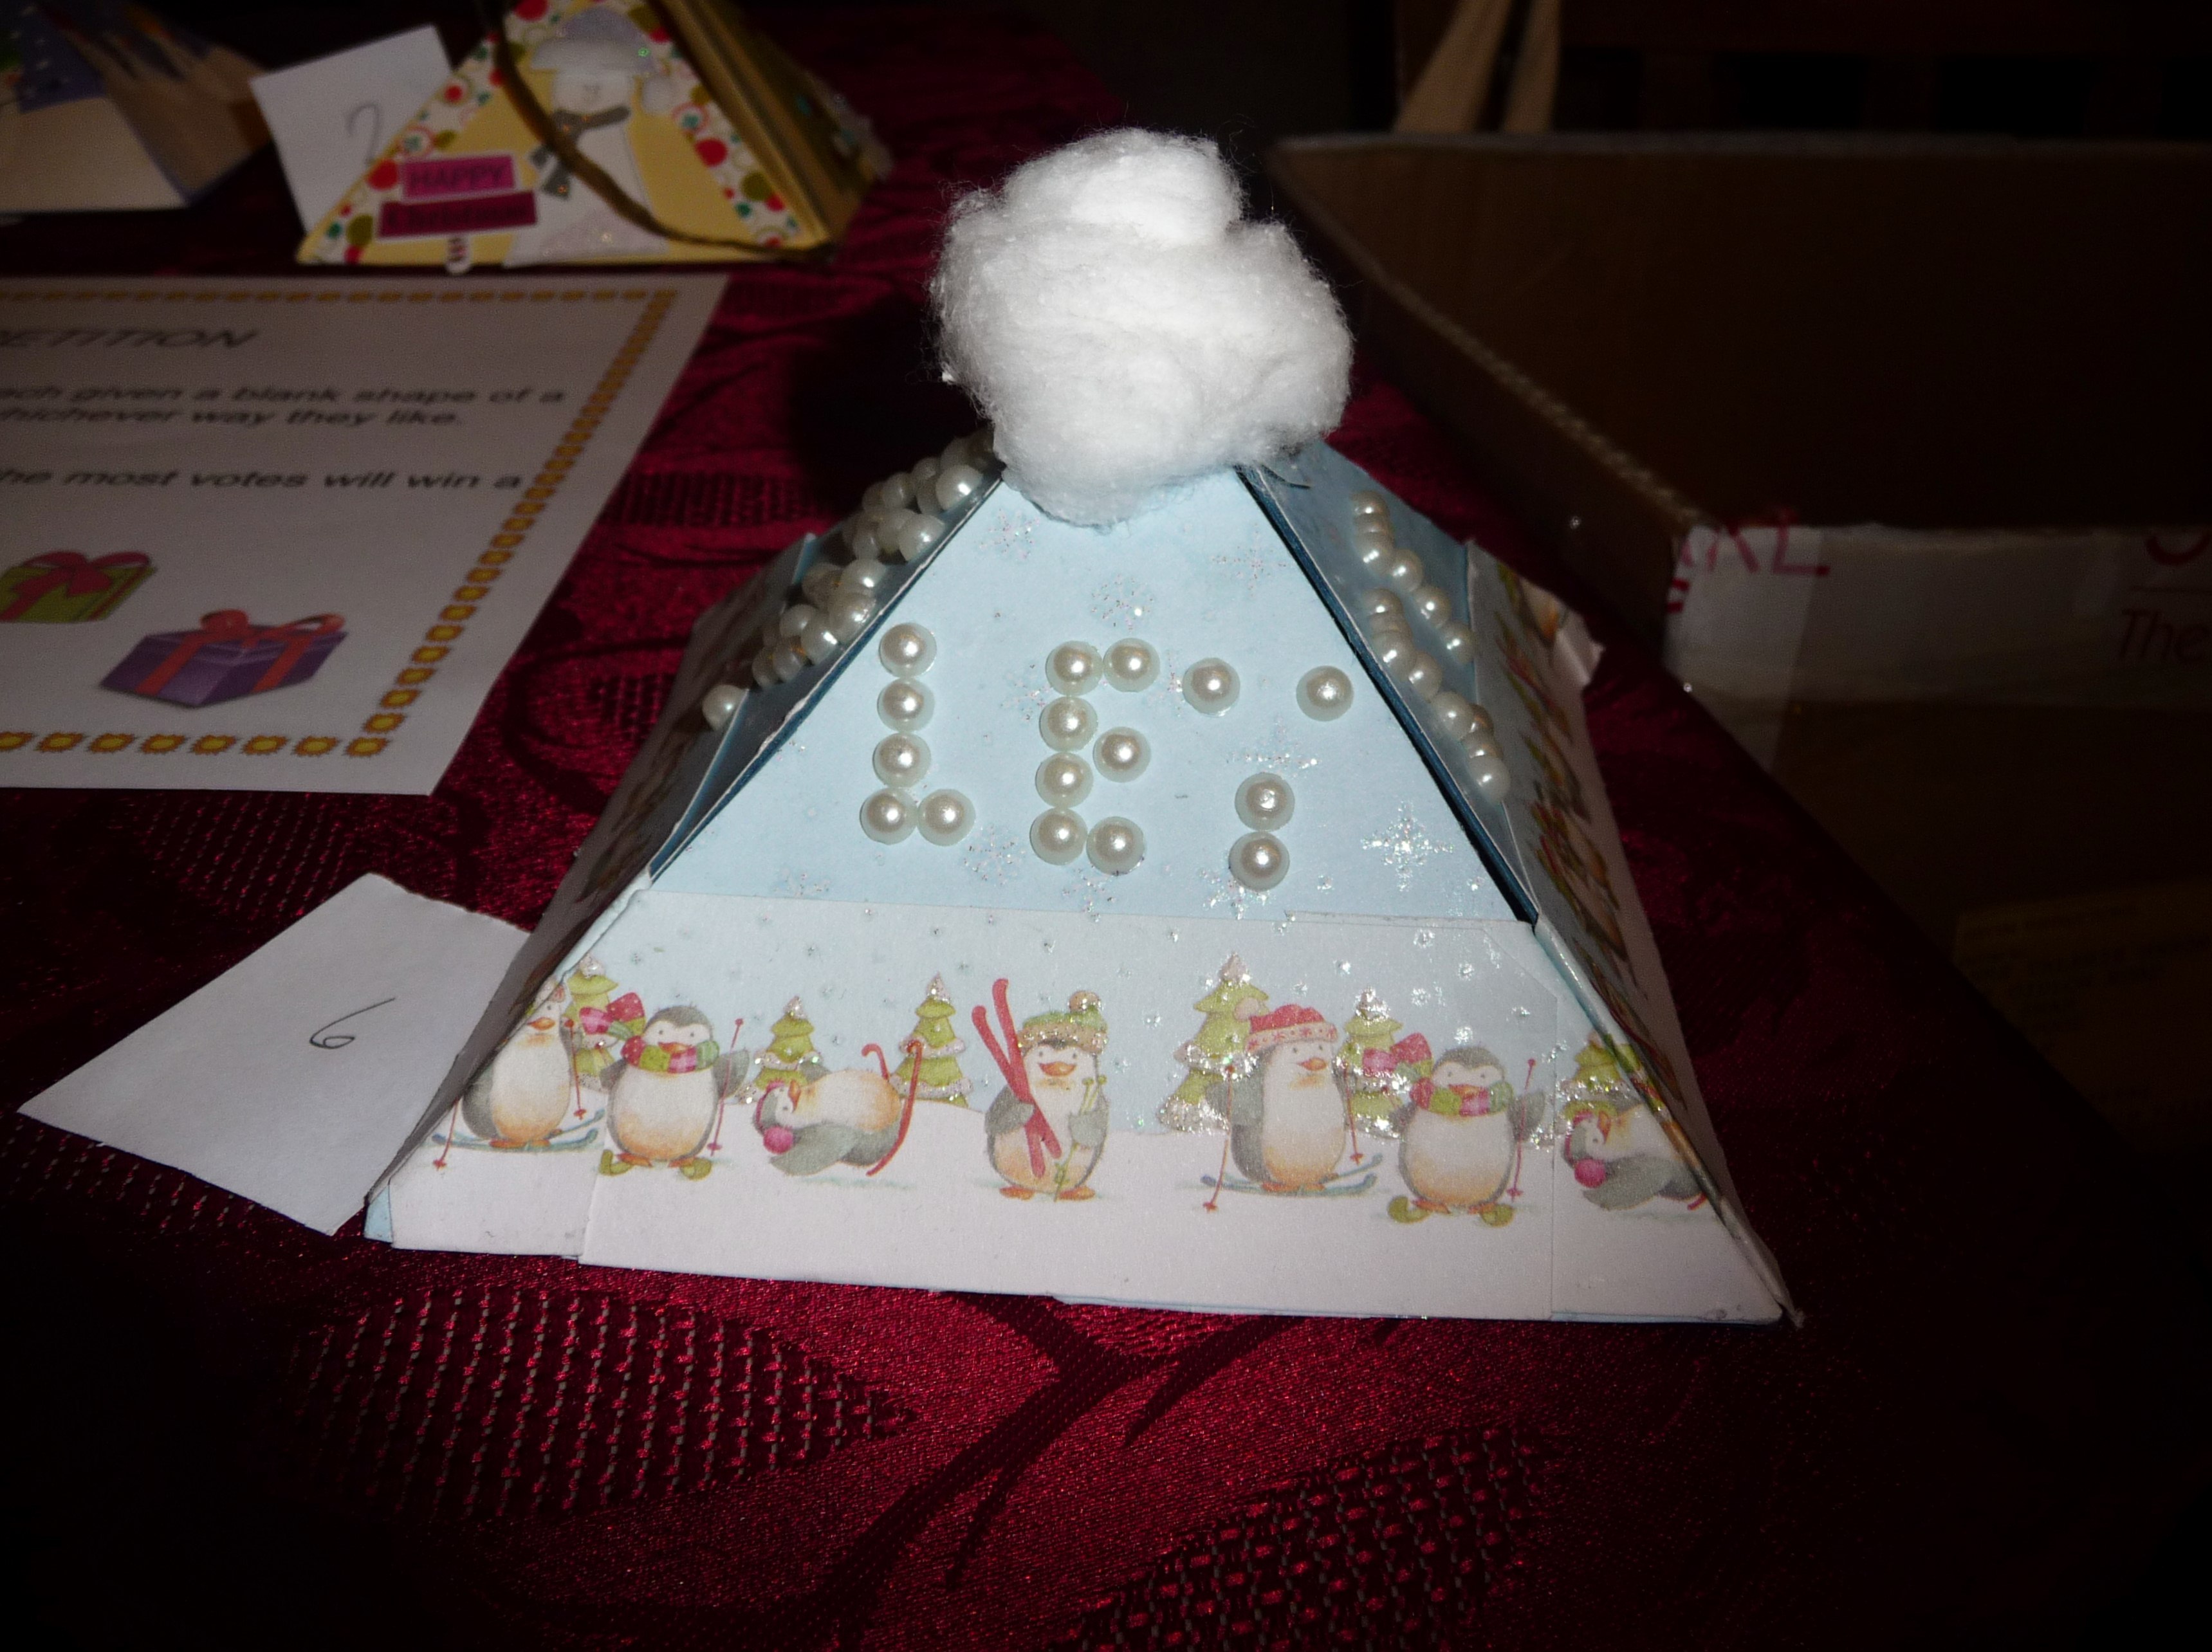 entry to YE Christmas competition 2015